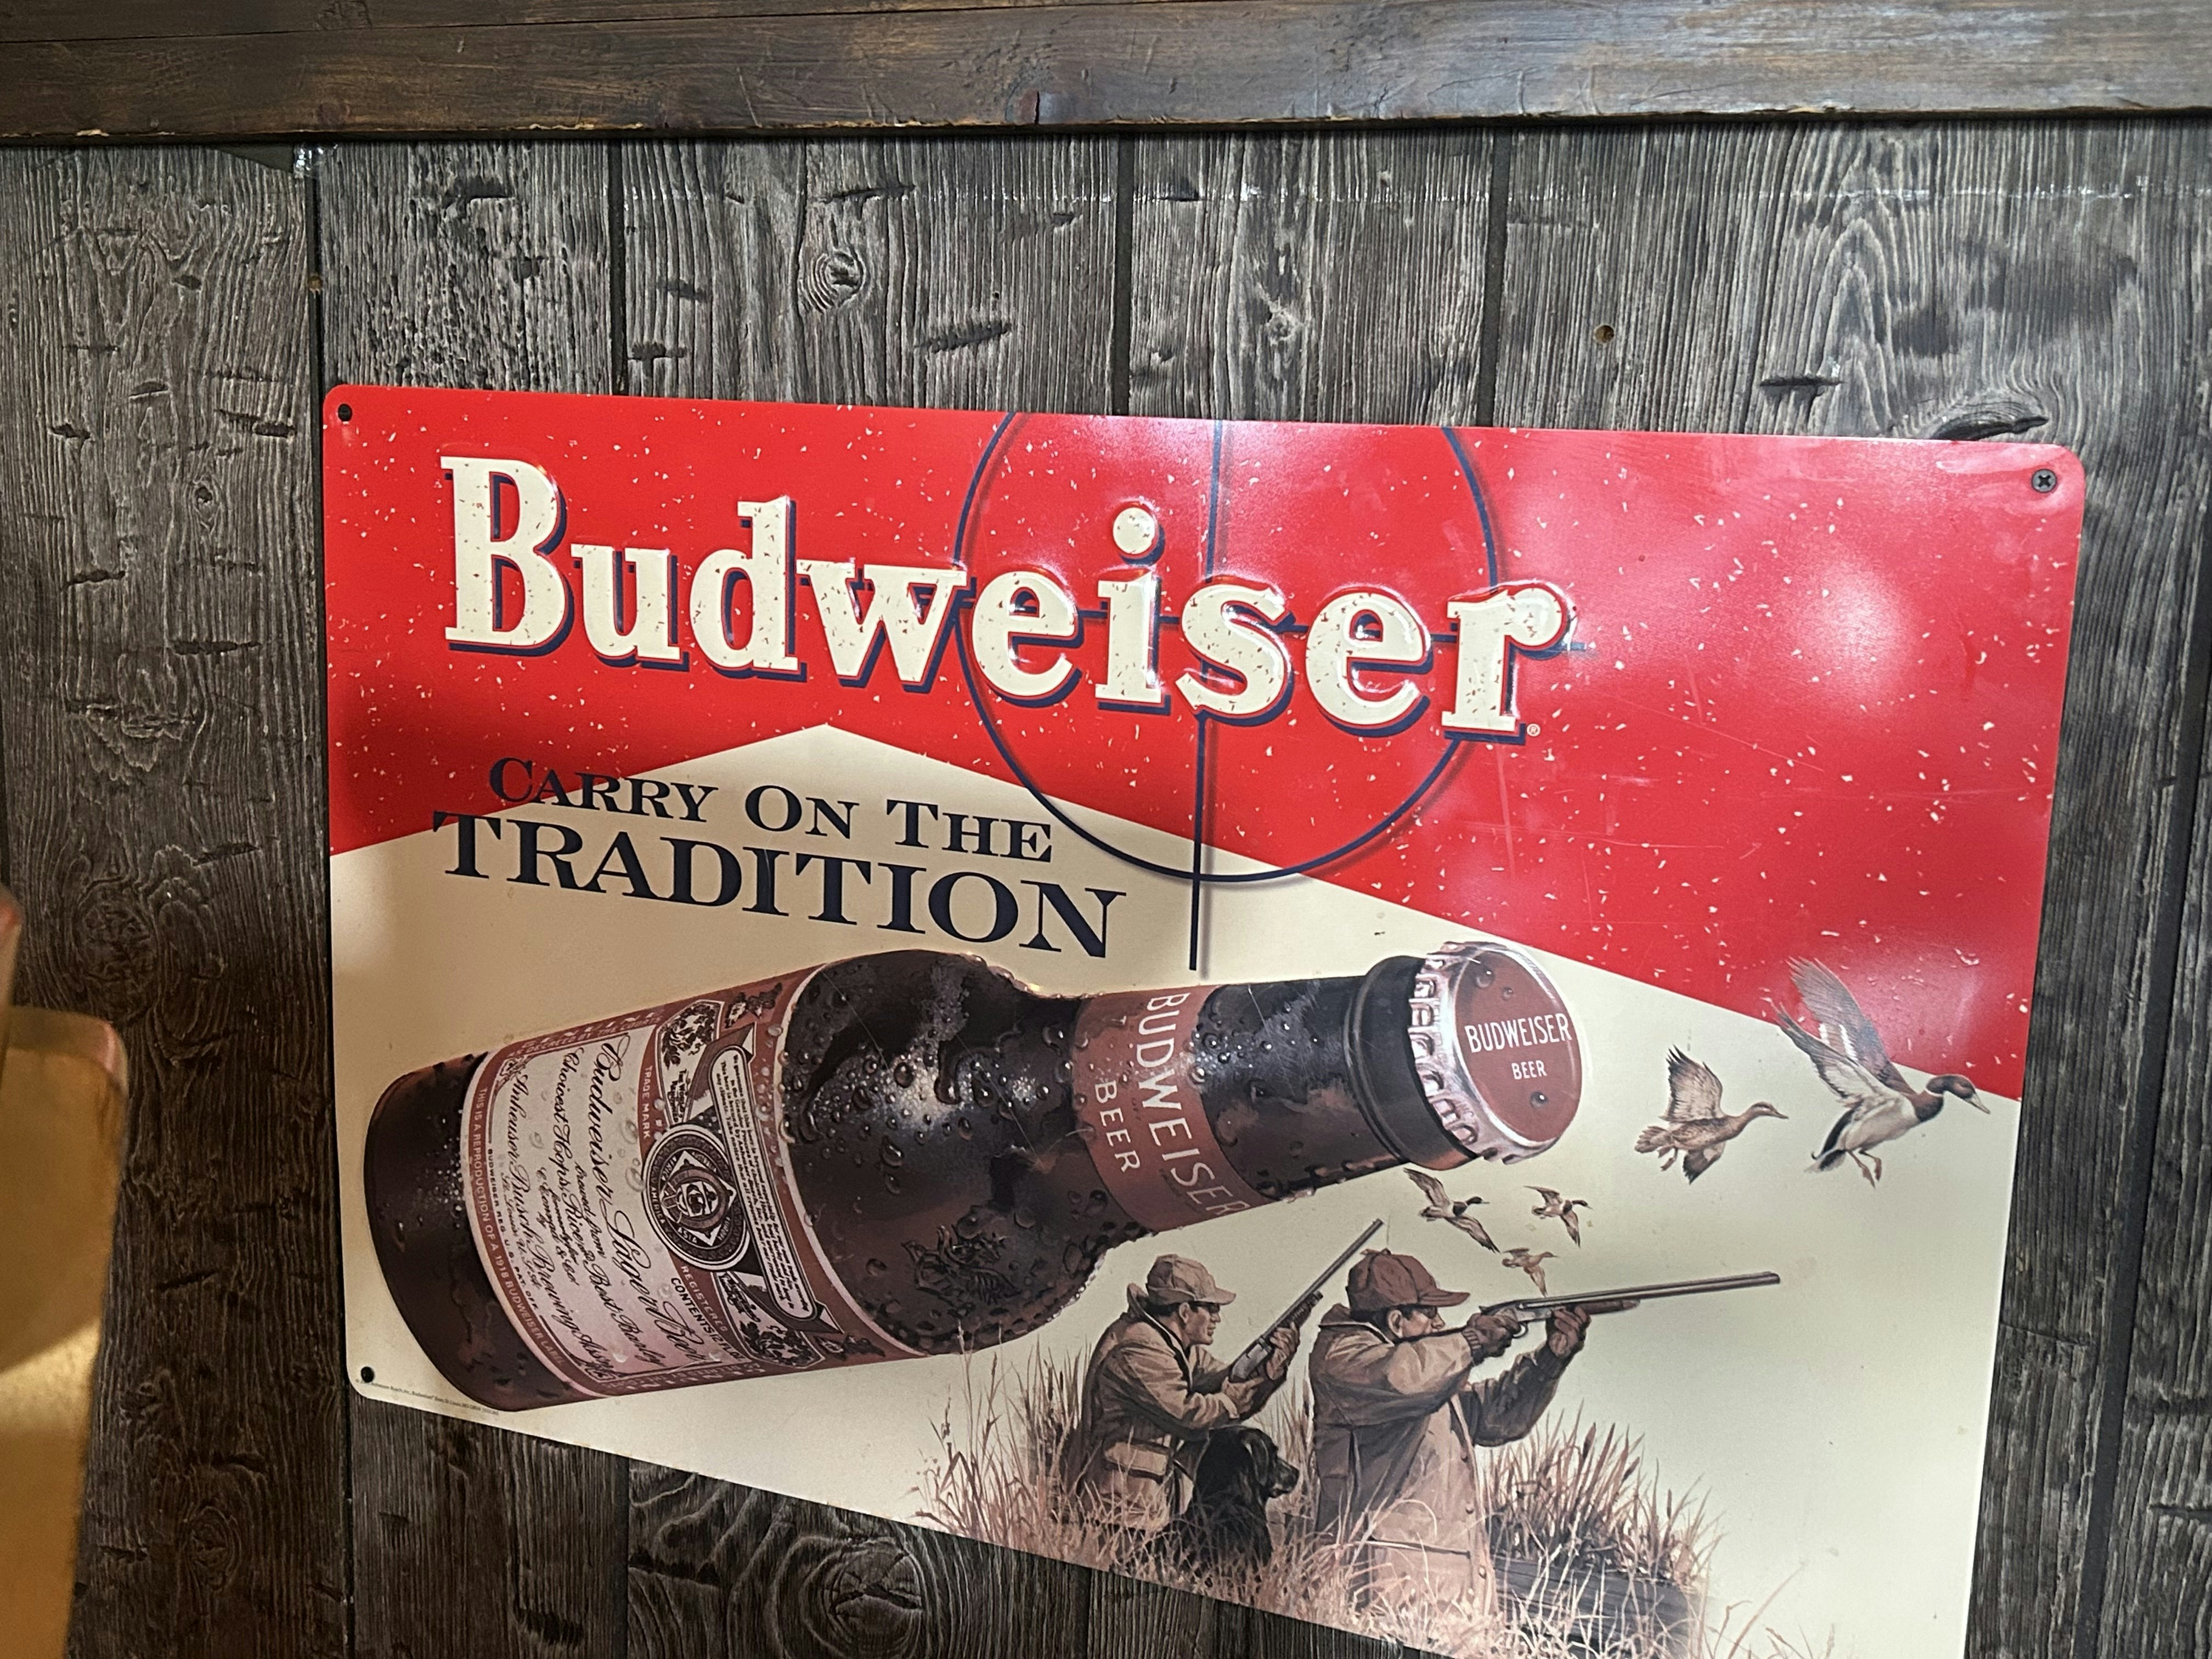 A Budweiser sign at the GRB.